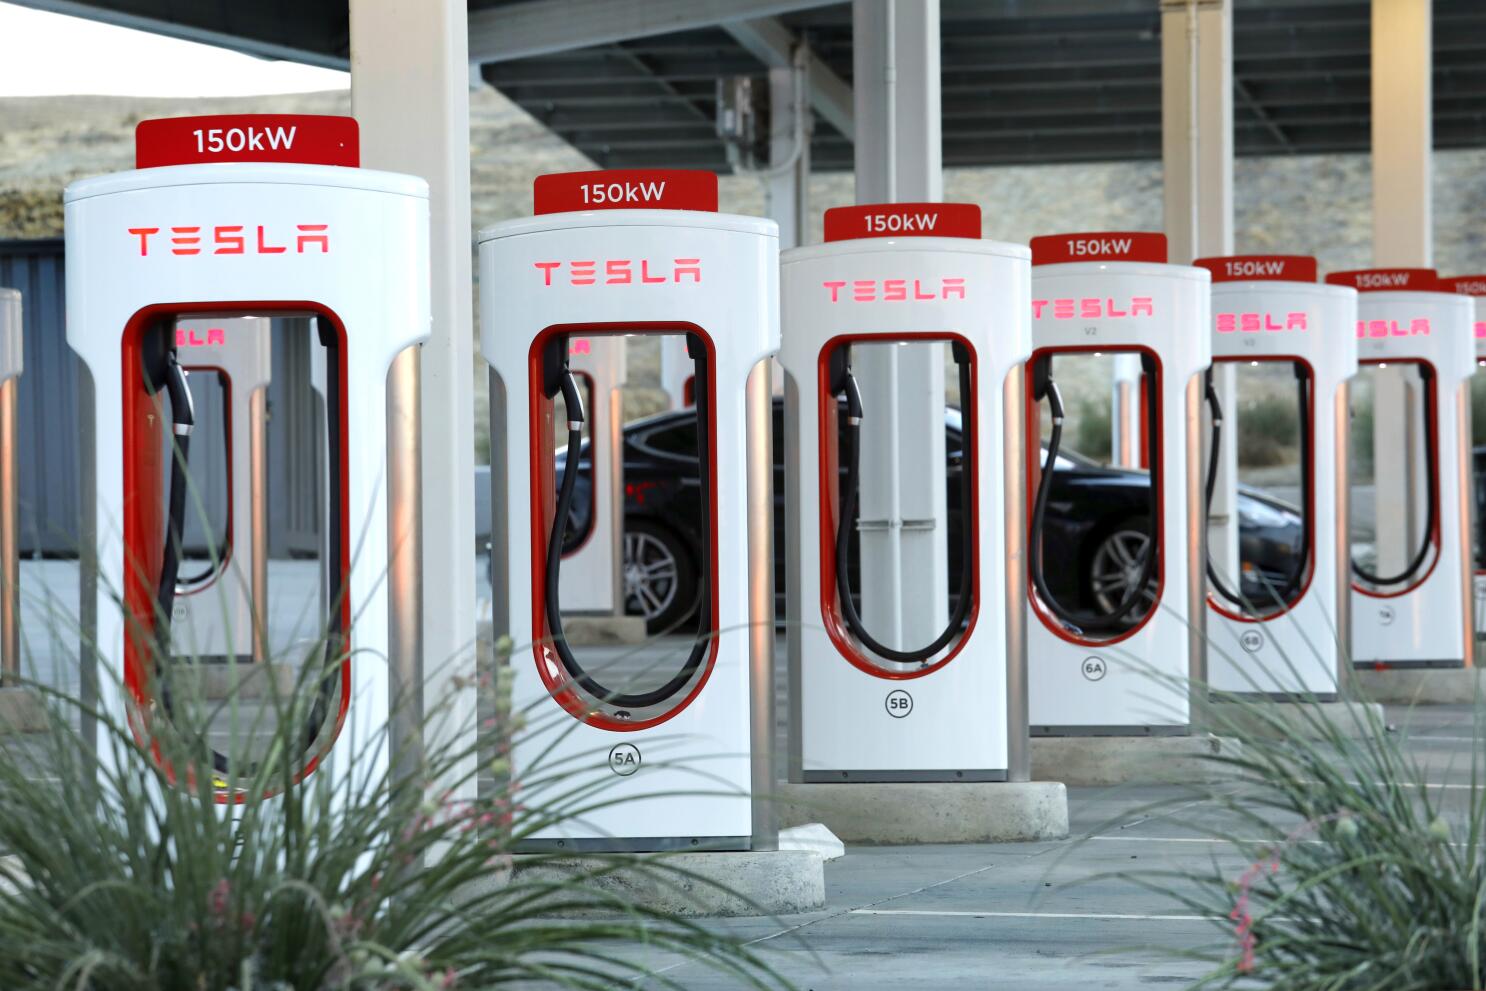 U.S. government will pay Tesla to open its charger network to